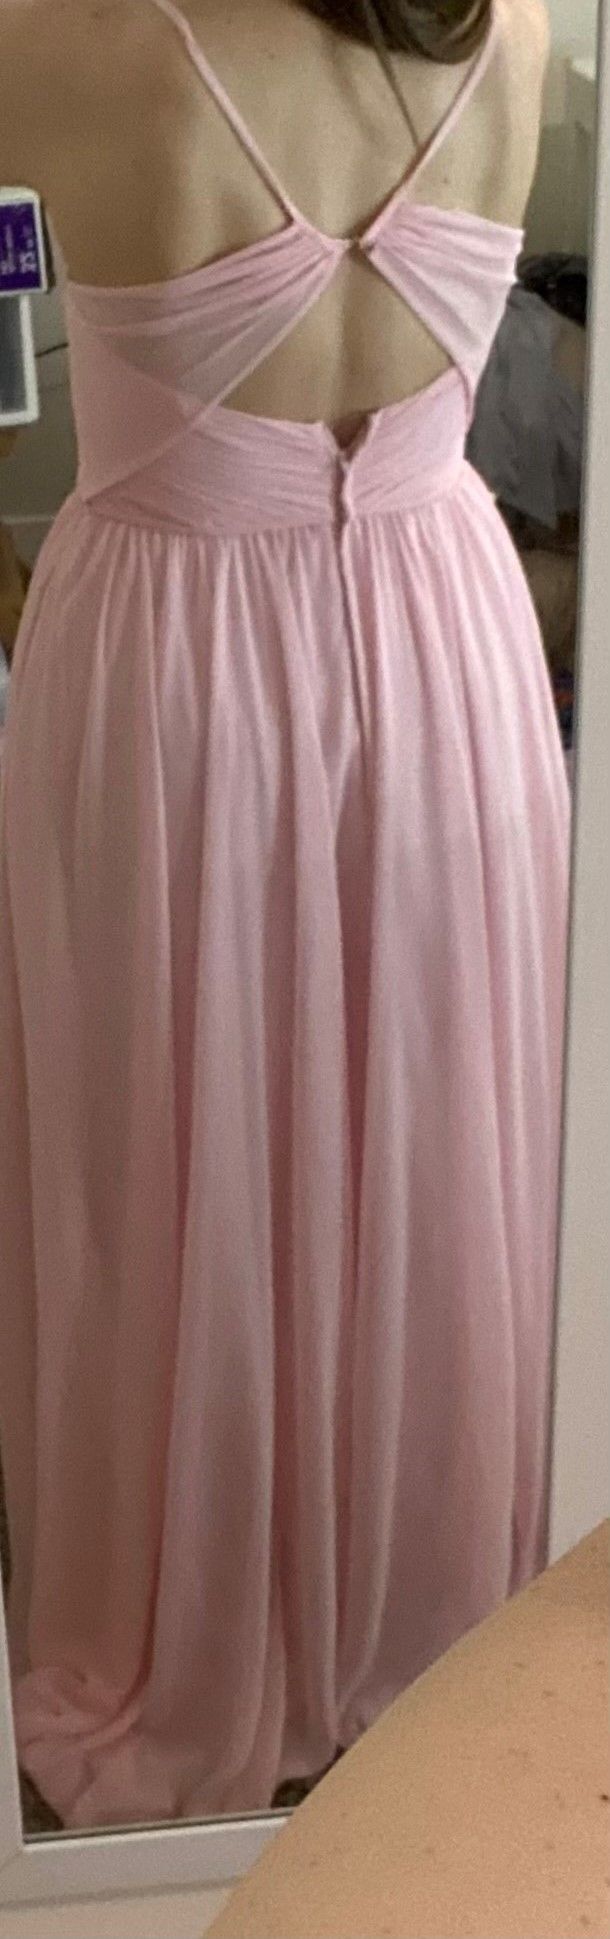 MoriLee Size 10 Bridesmaid Satin Light Pink A-line Dress on Queenly